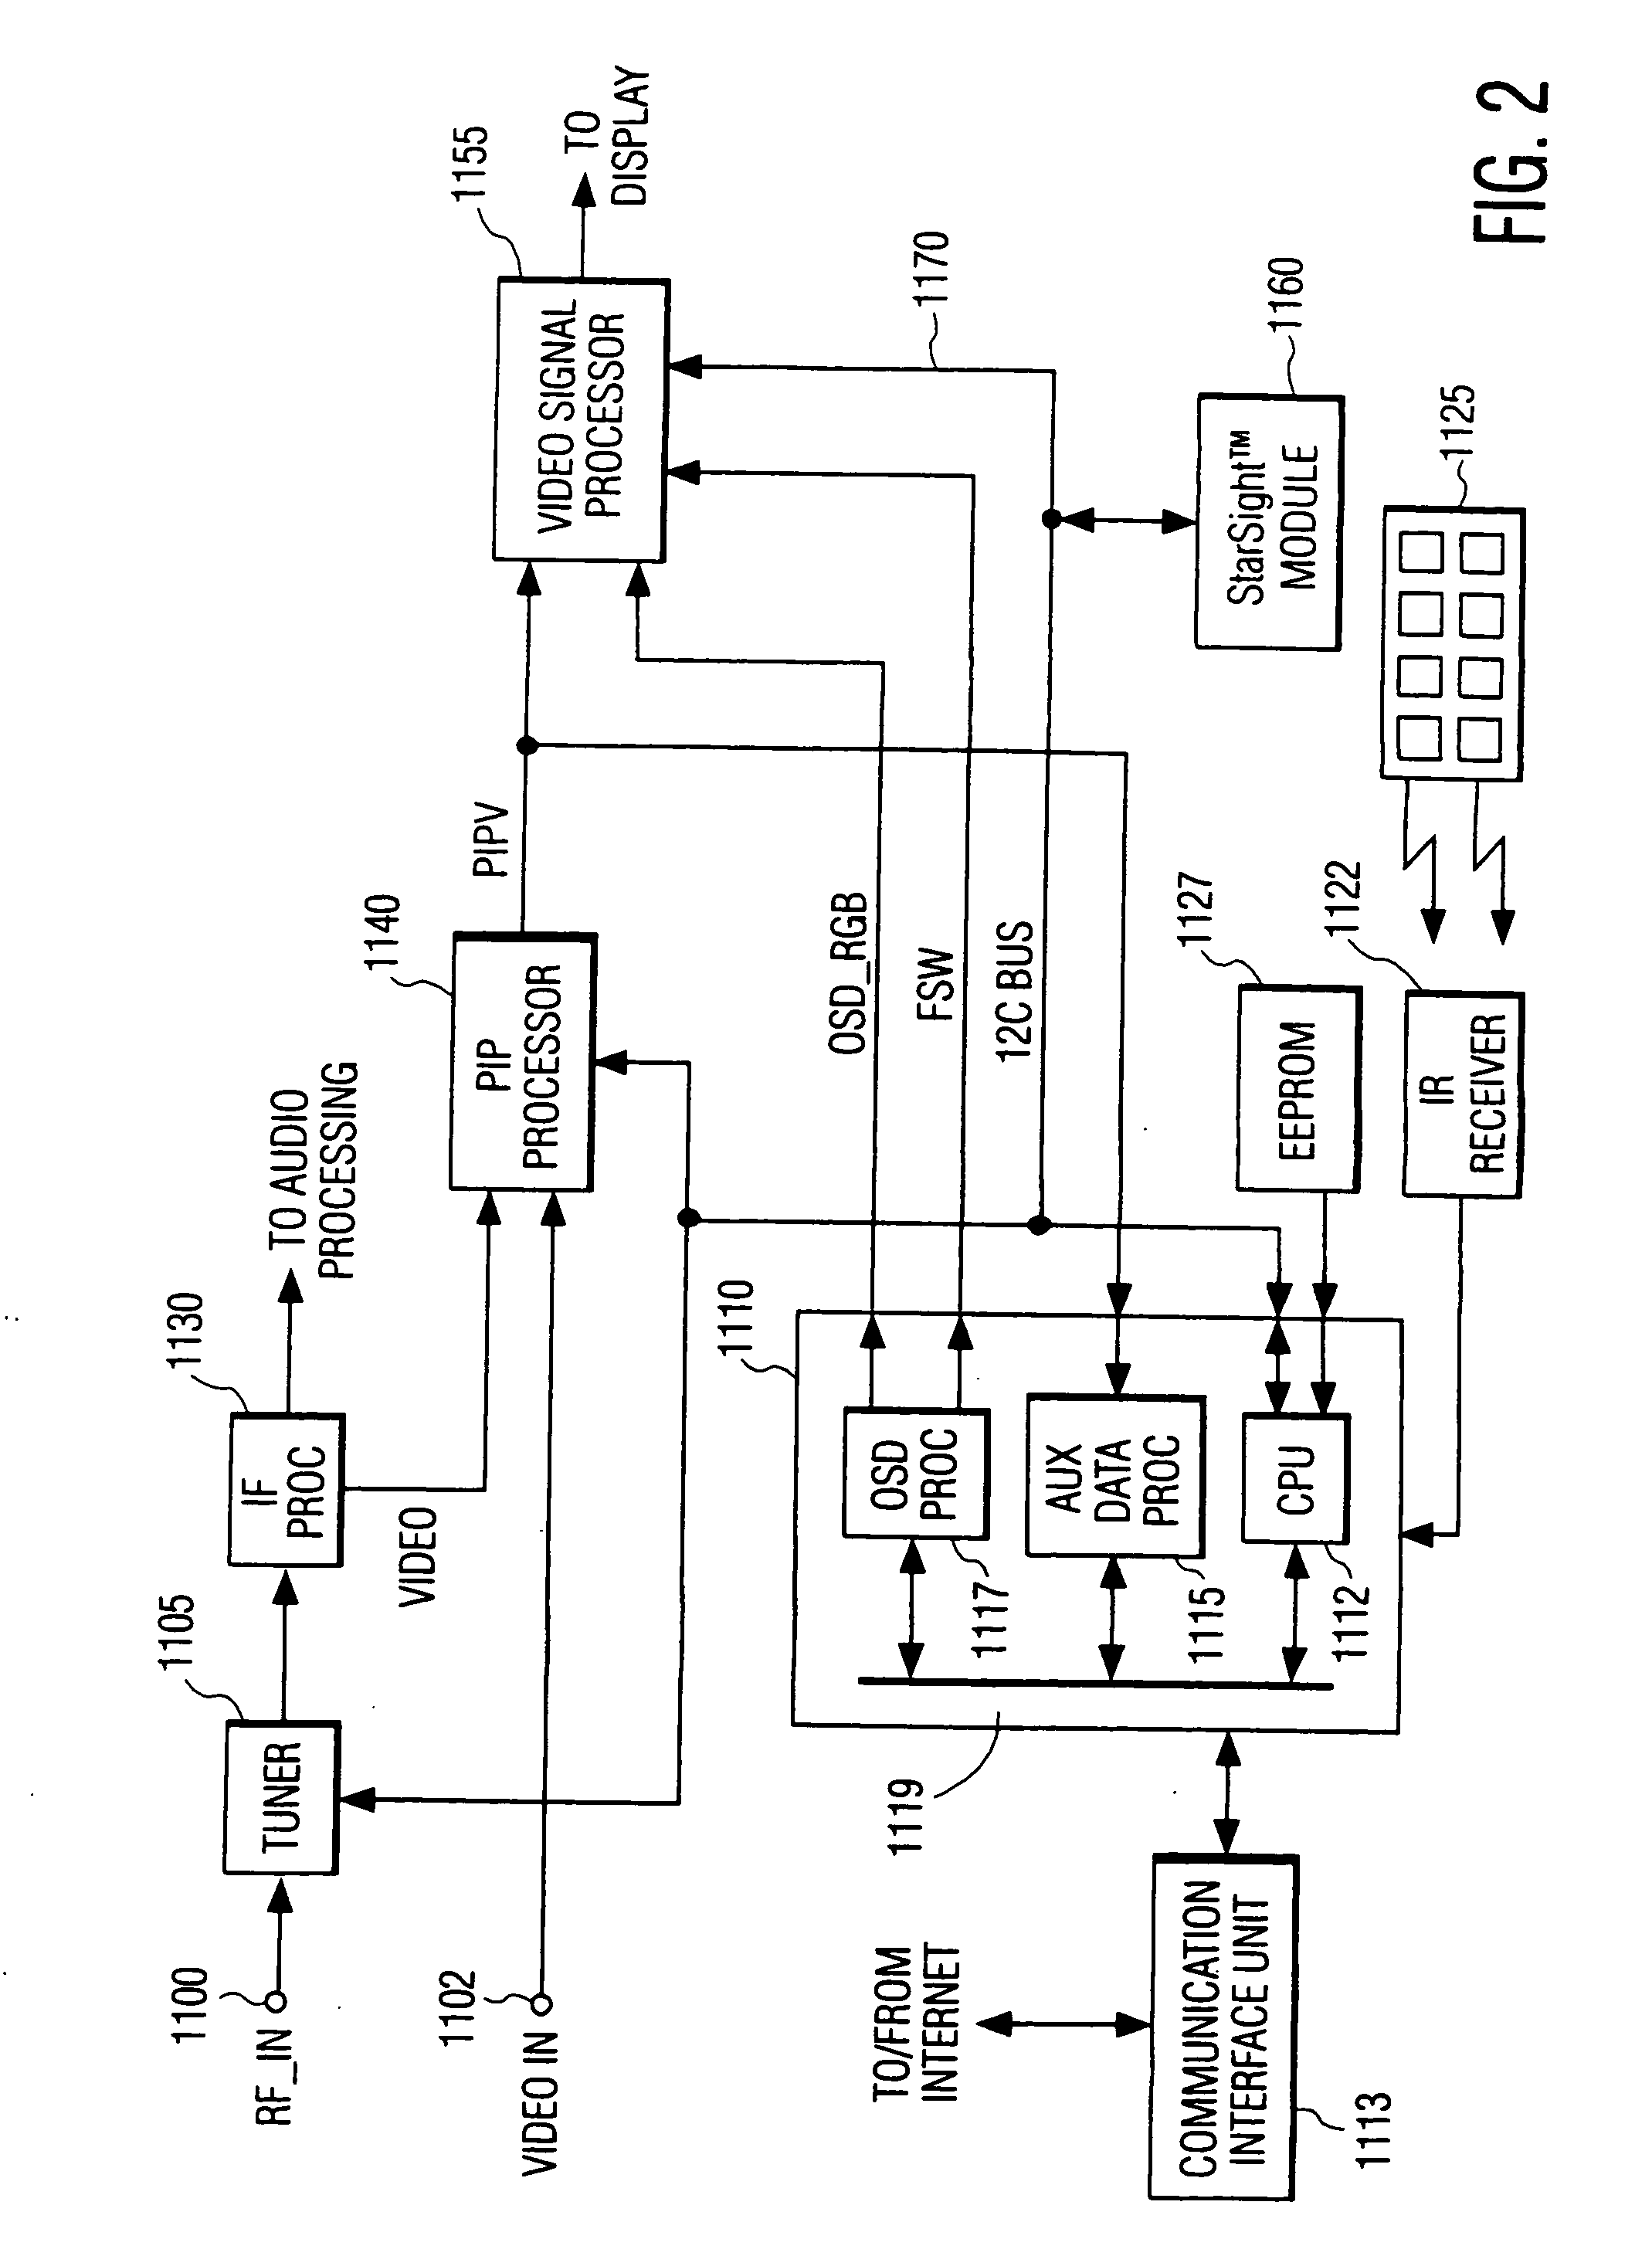 Advertisement presentation and tracking in a television apparatus